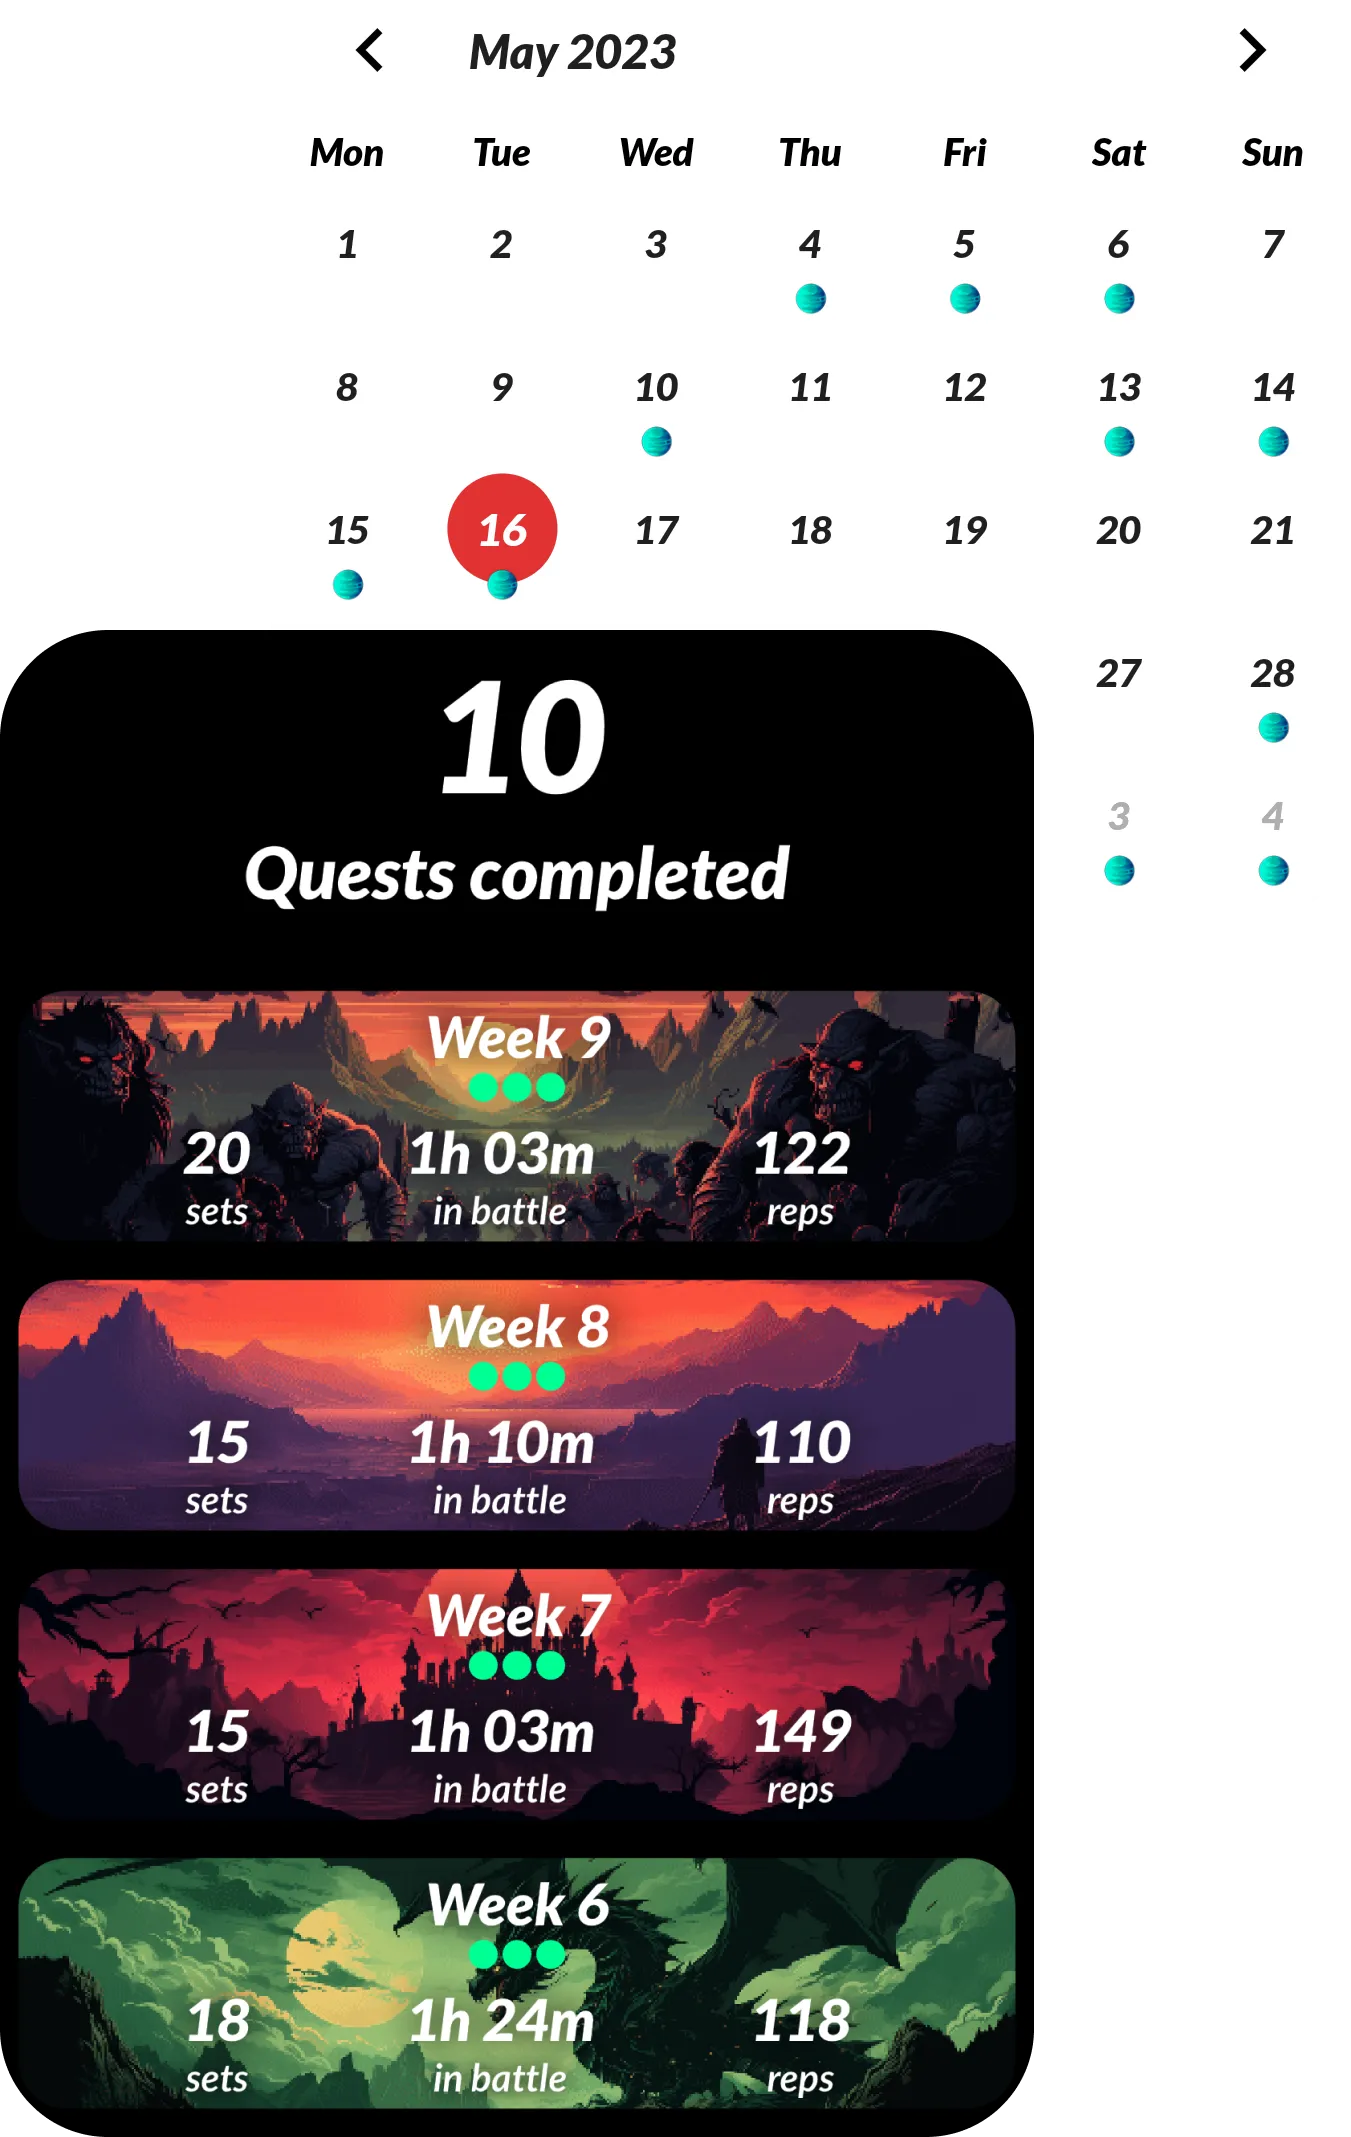 Workout tracking and quests